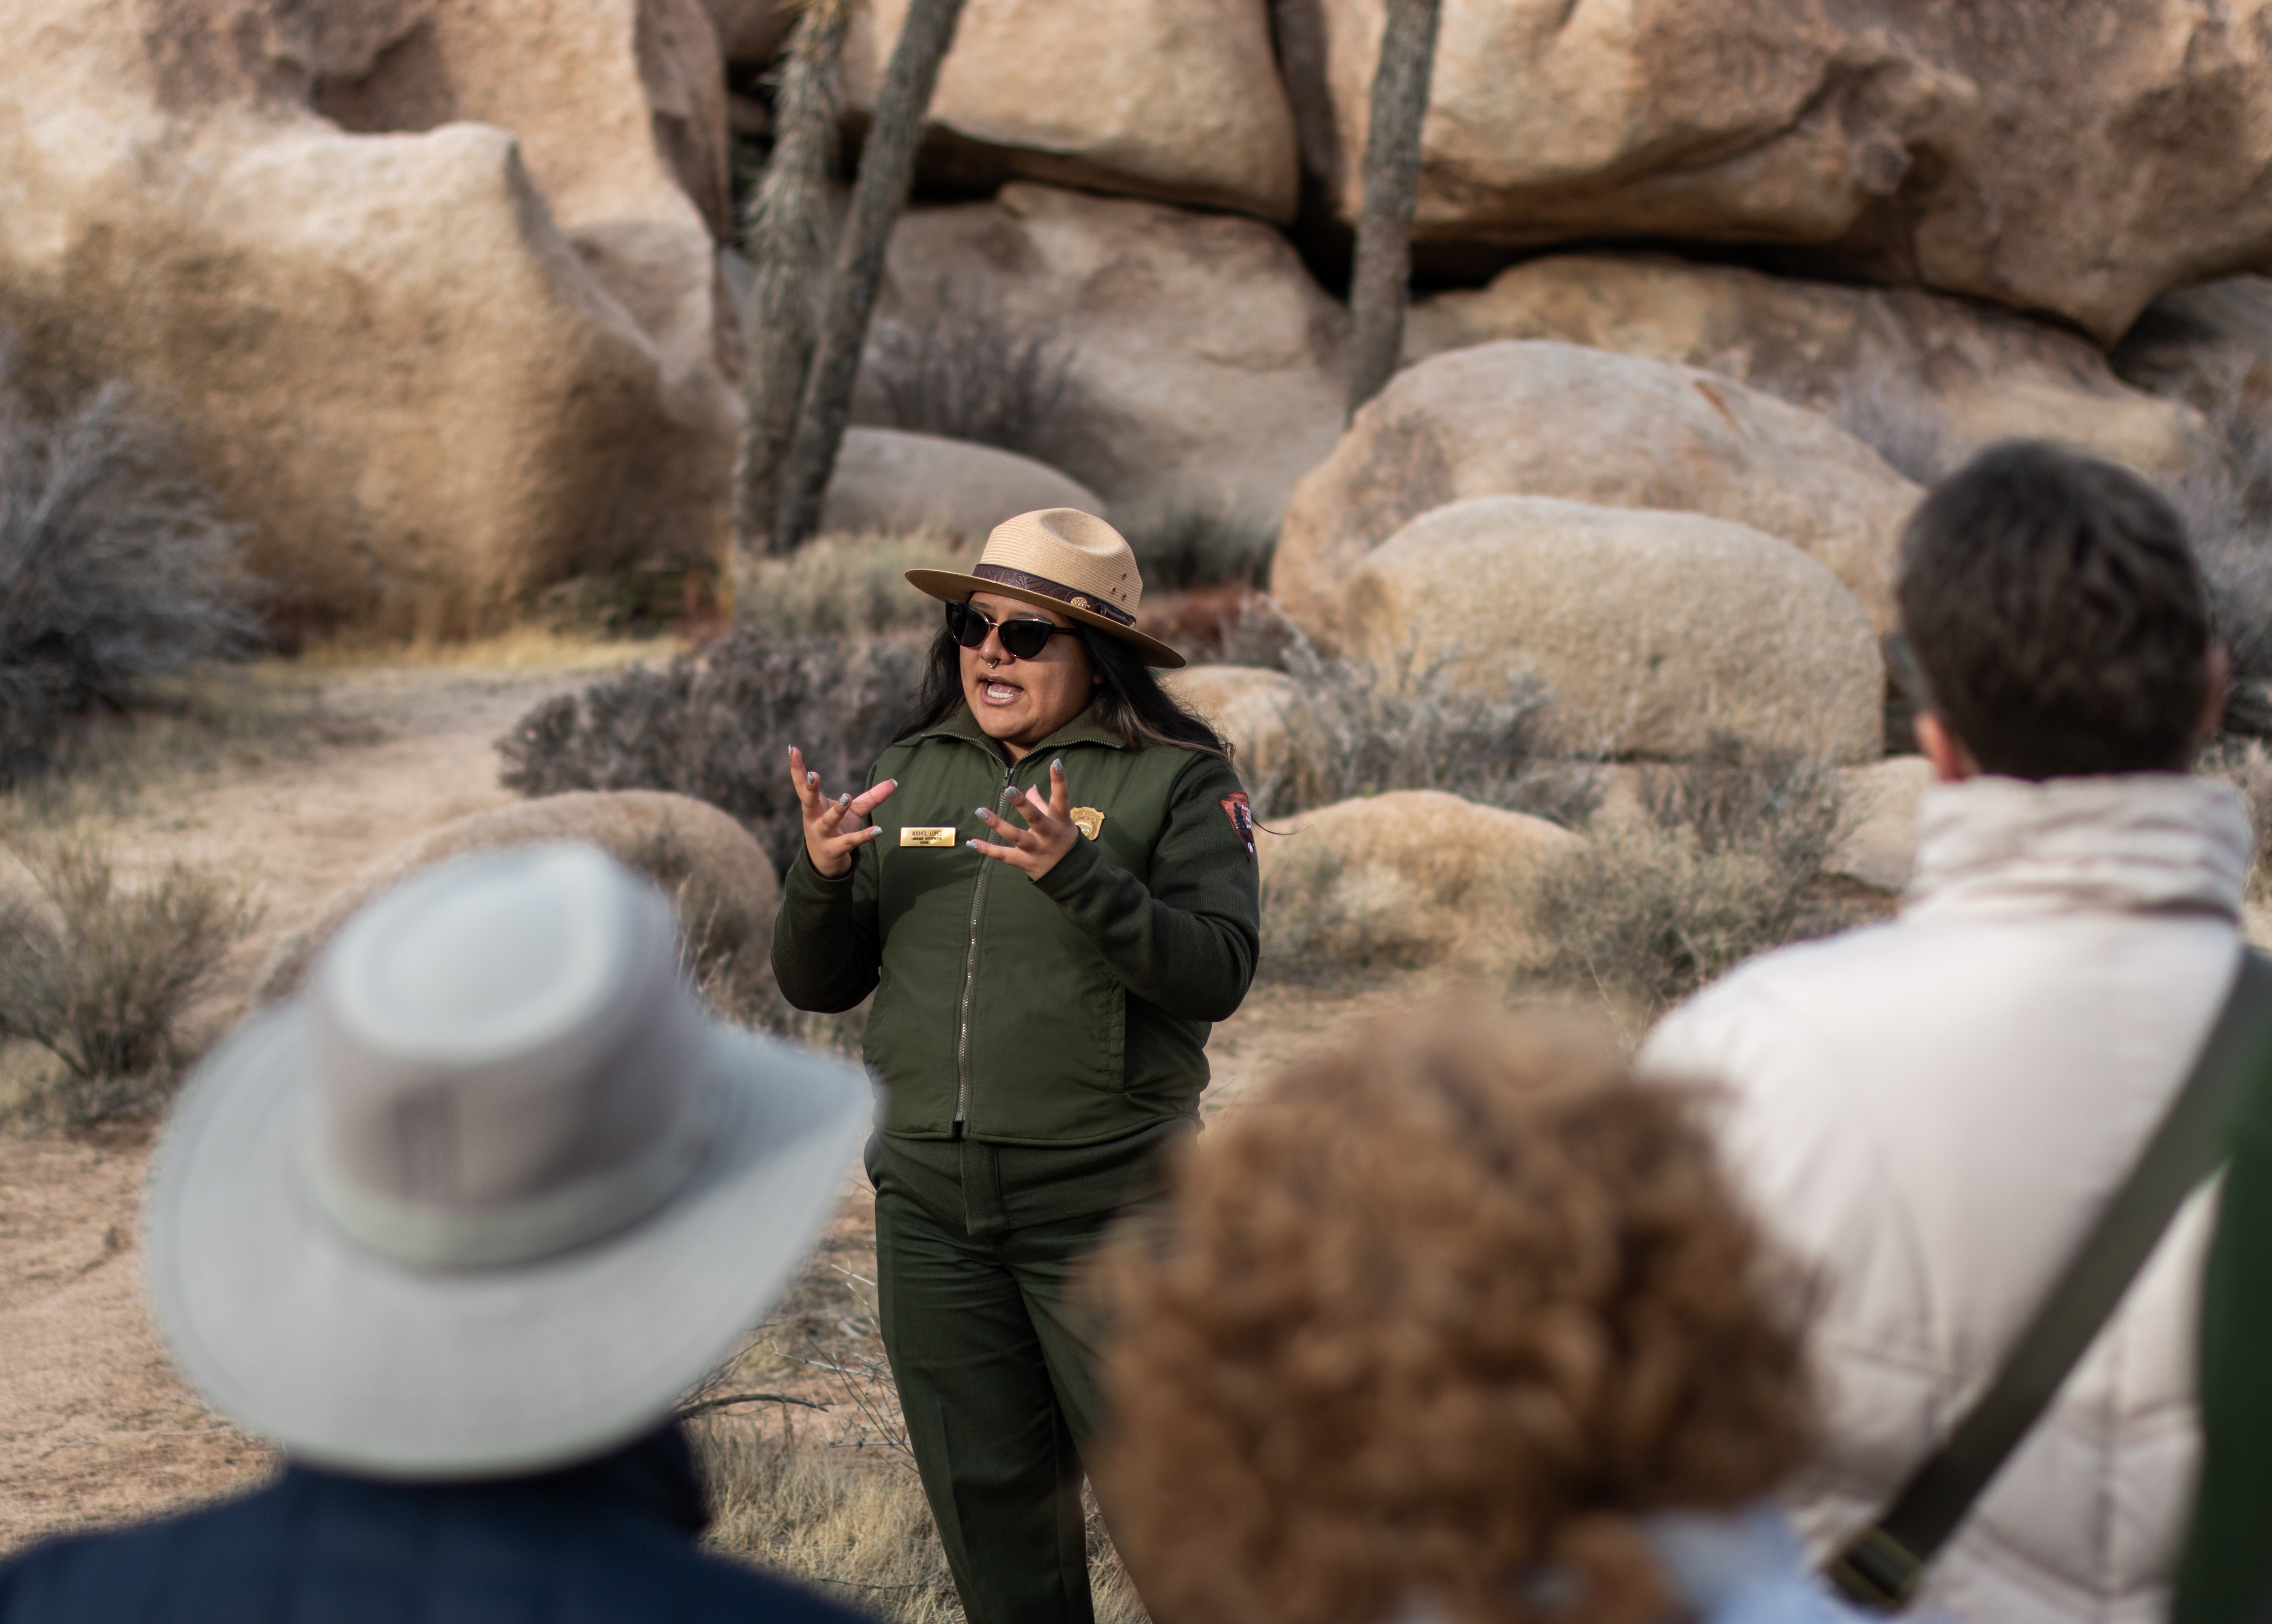 A Park Ranger giving tour with blurred park visitors in the foreground.